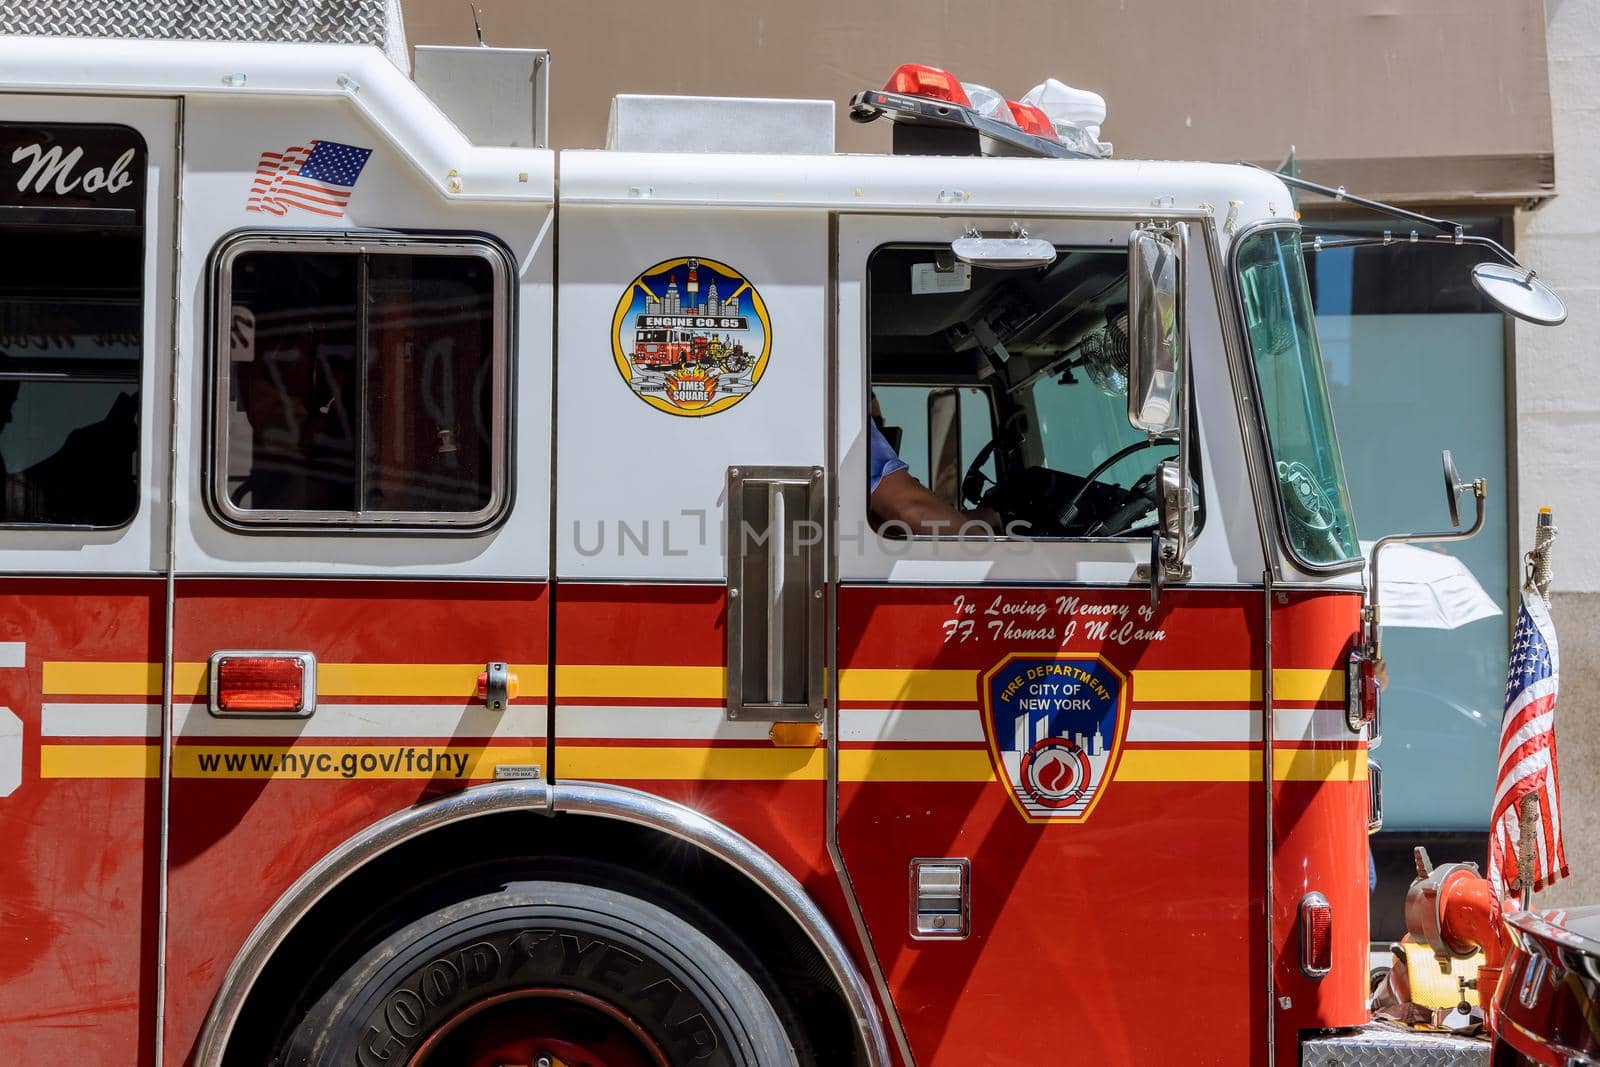 18 June 2021 New York, USA: Lower Manhattan, United States, fire truck in town